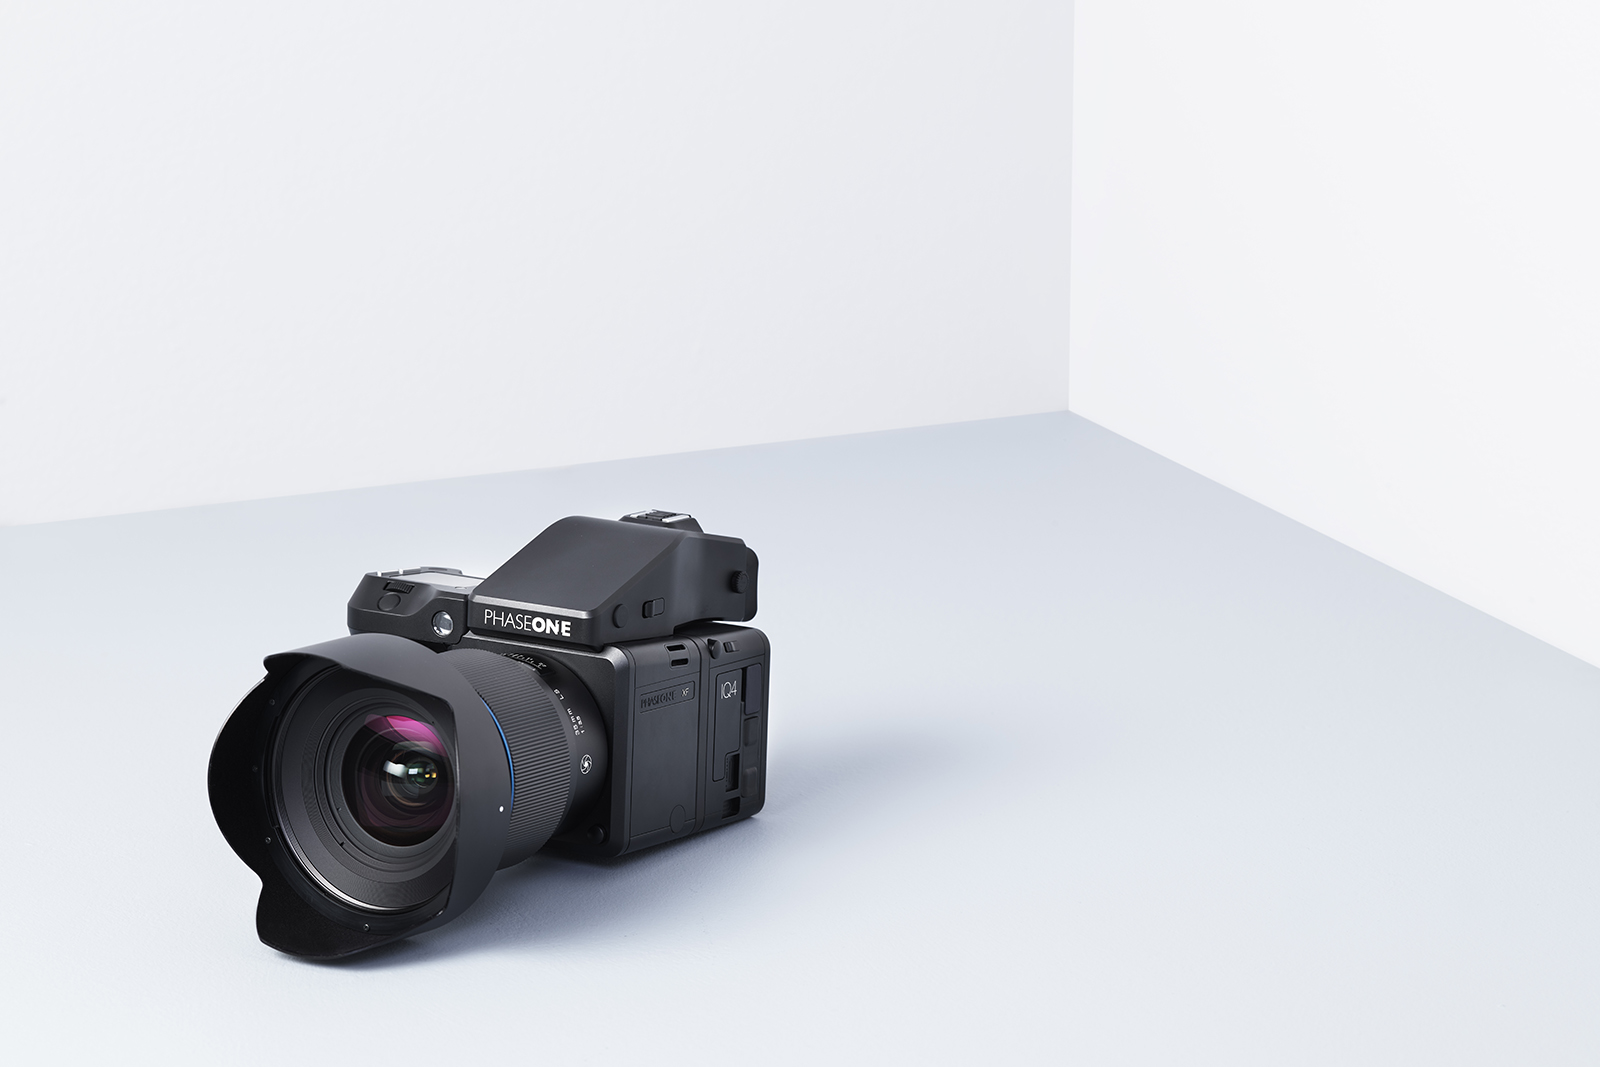 phase one infinity xf announced iq4 camera system 35mm lens